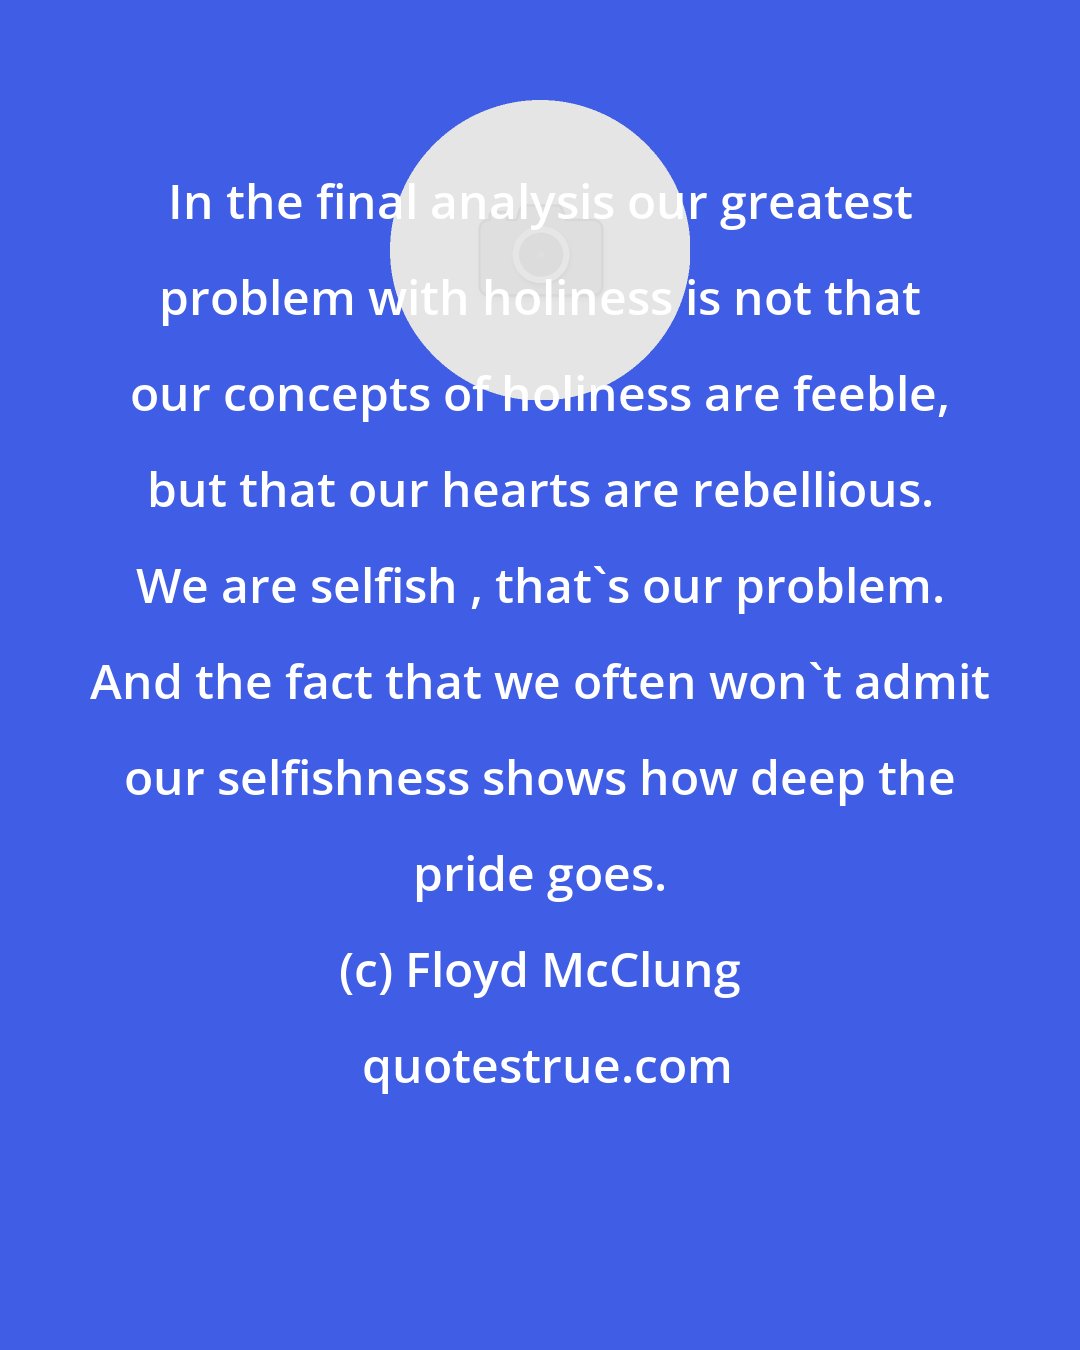 Floyd McClung: In the final analysis our greatest problem with holiness is not that our concepts of holiness are feeble, but that our hearts are rebellious. We are selfish , that's our problem. And the fact that we often won't admit our selfishness shows how deep the pride goes.